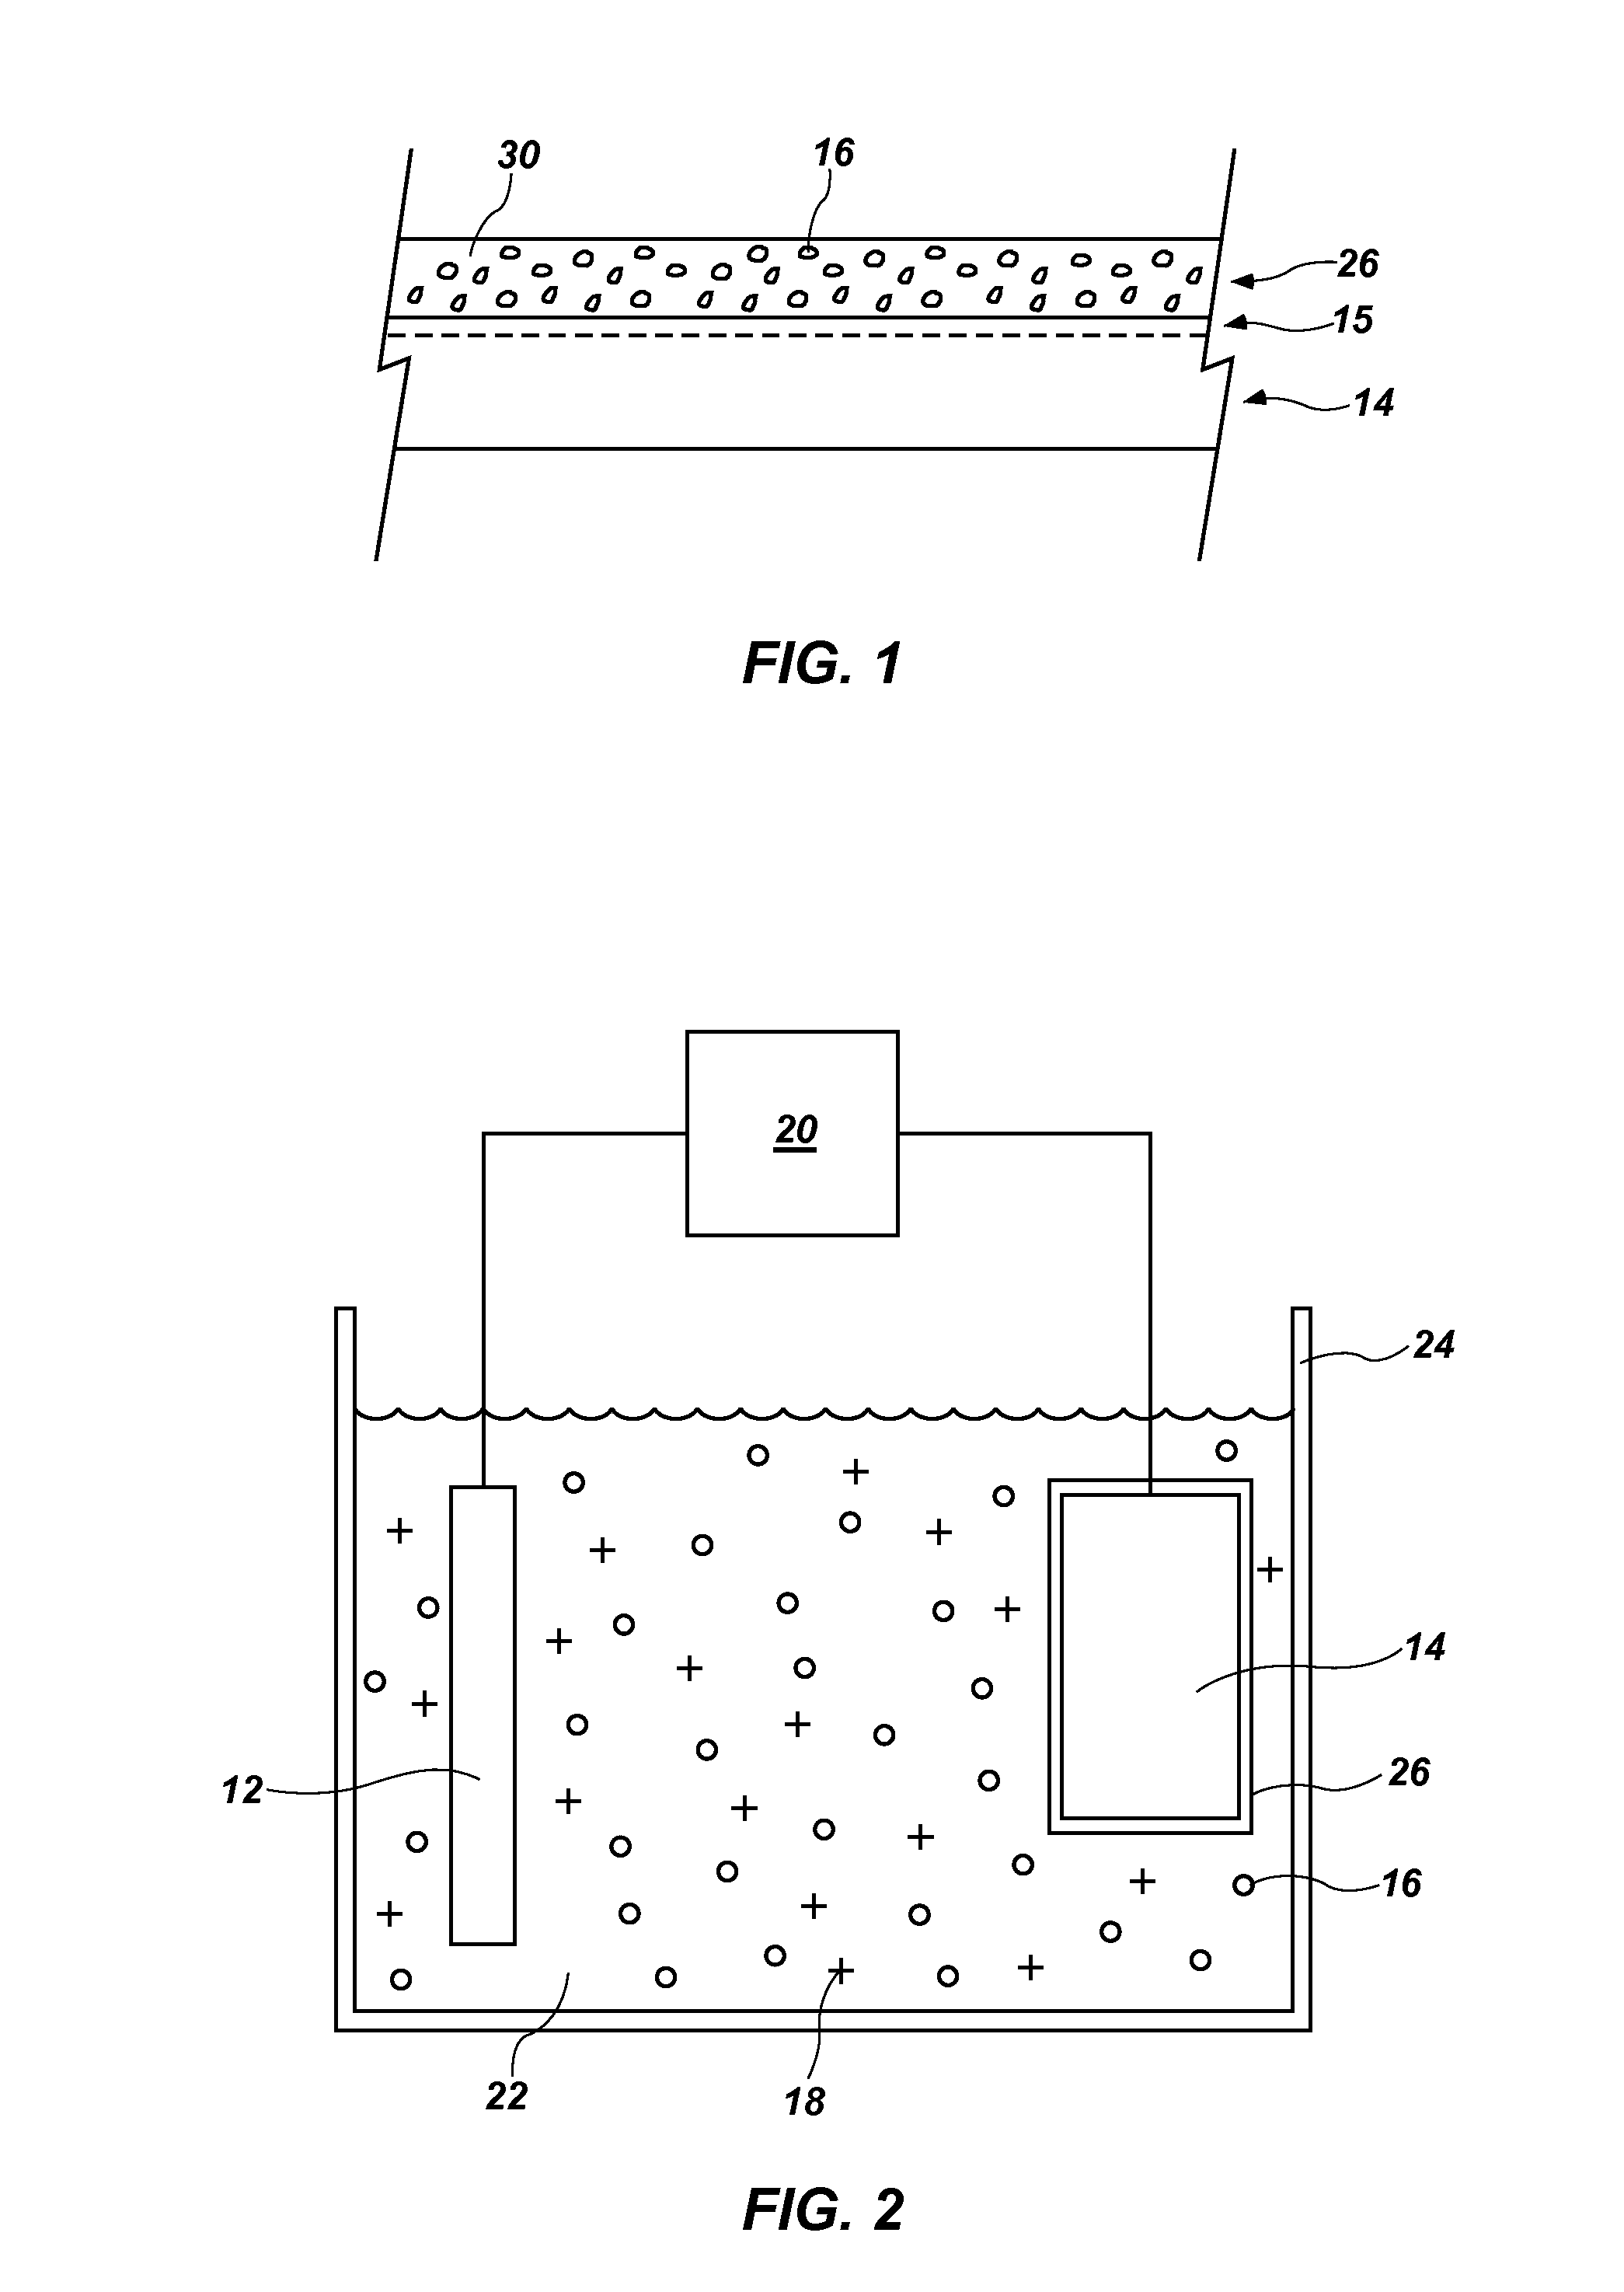 Methods of coating substrates with composite coatings of diamond nanoparticles and metal